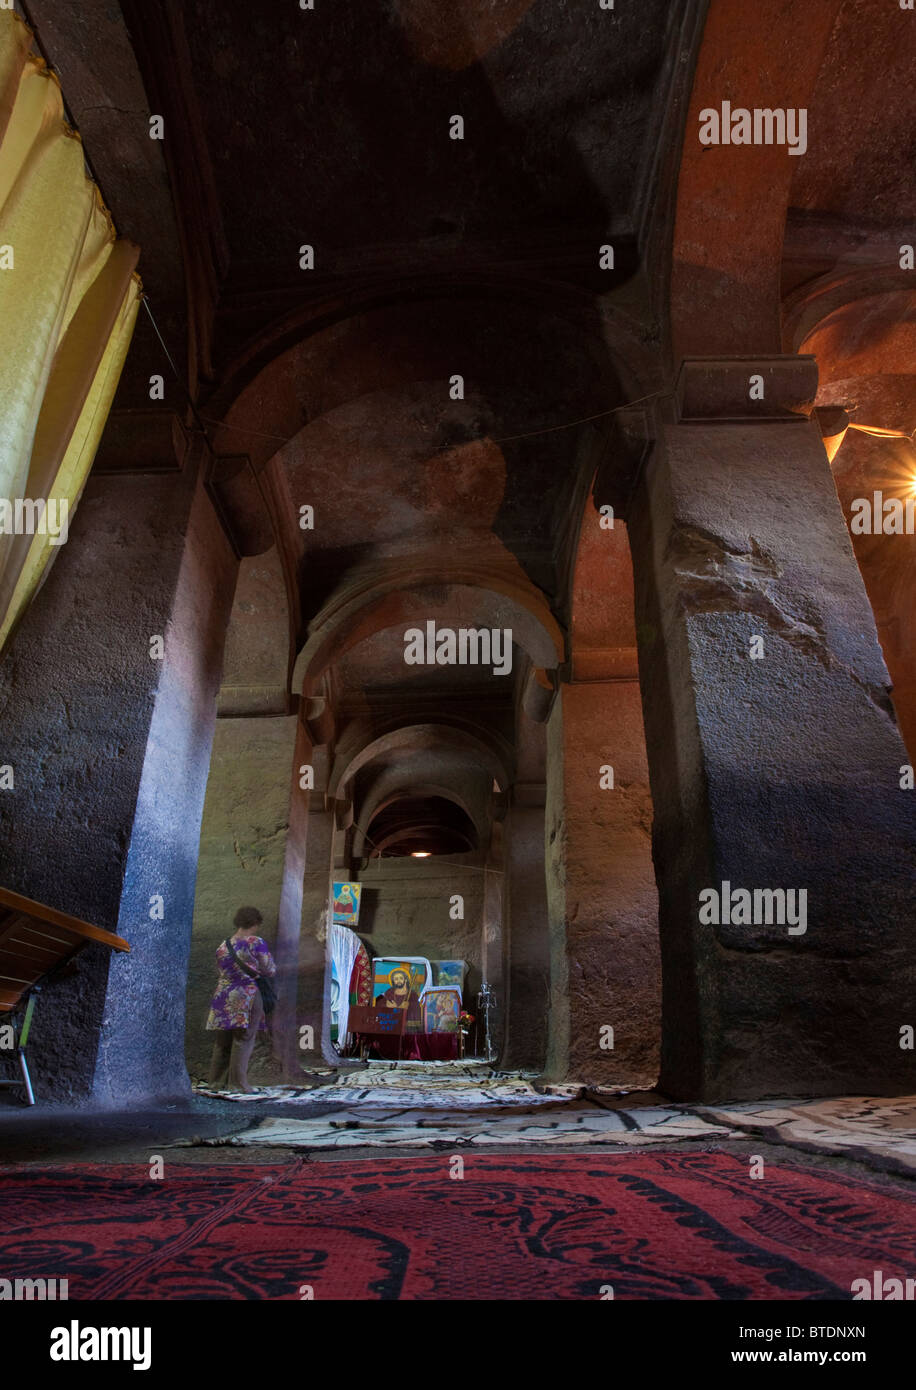 Interior of the rock-hewn church, Beta Medhane Alem (House of the Saviour of the World) Stock Photo